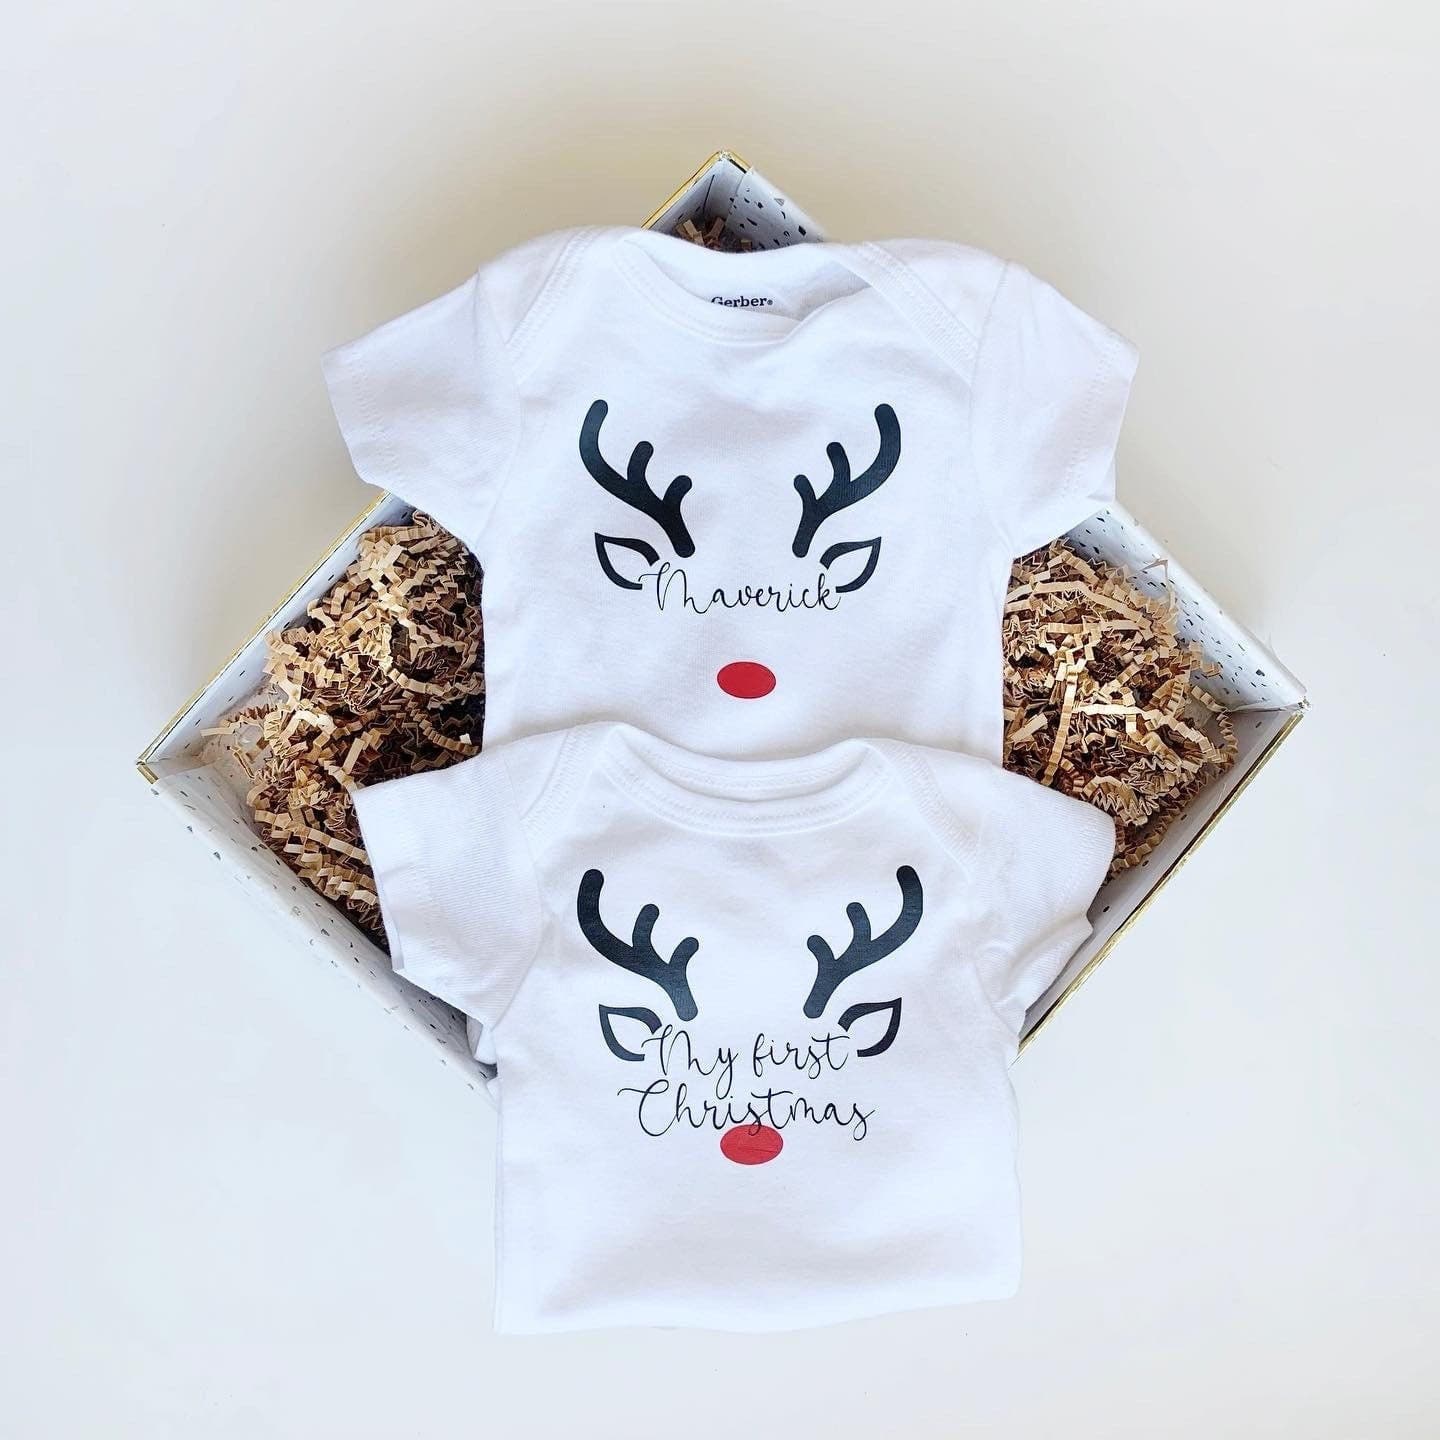 Baby Christmas Outfit, Personalized Baby Ornament Stocking Stuffer, Baby Christmas Shirt, Custom Baby Xmas outfit Holiday Onesie®.